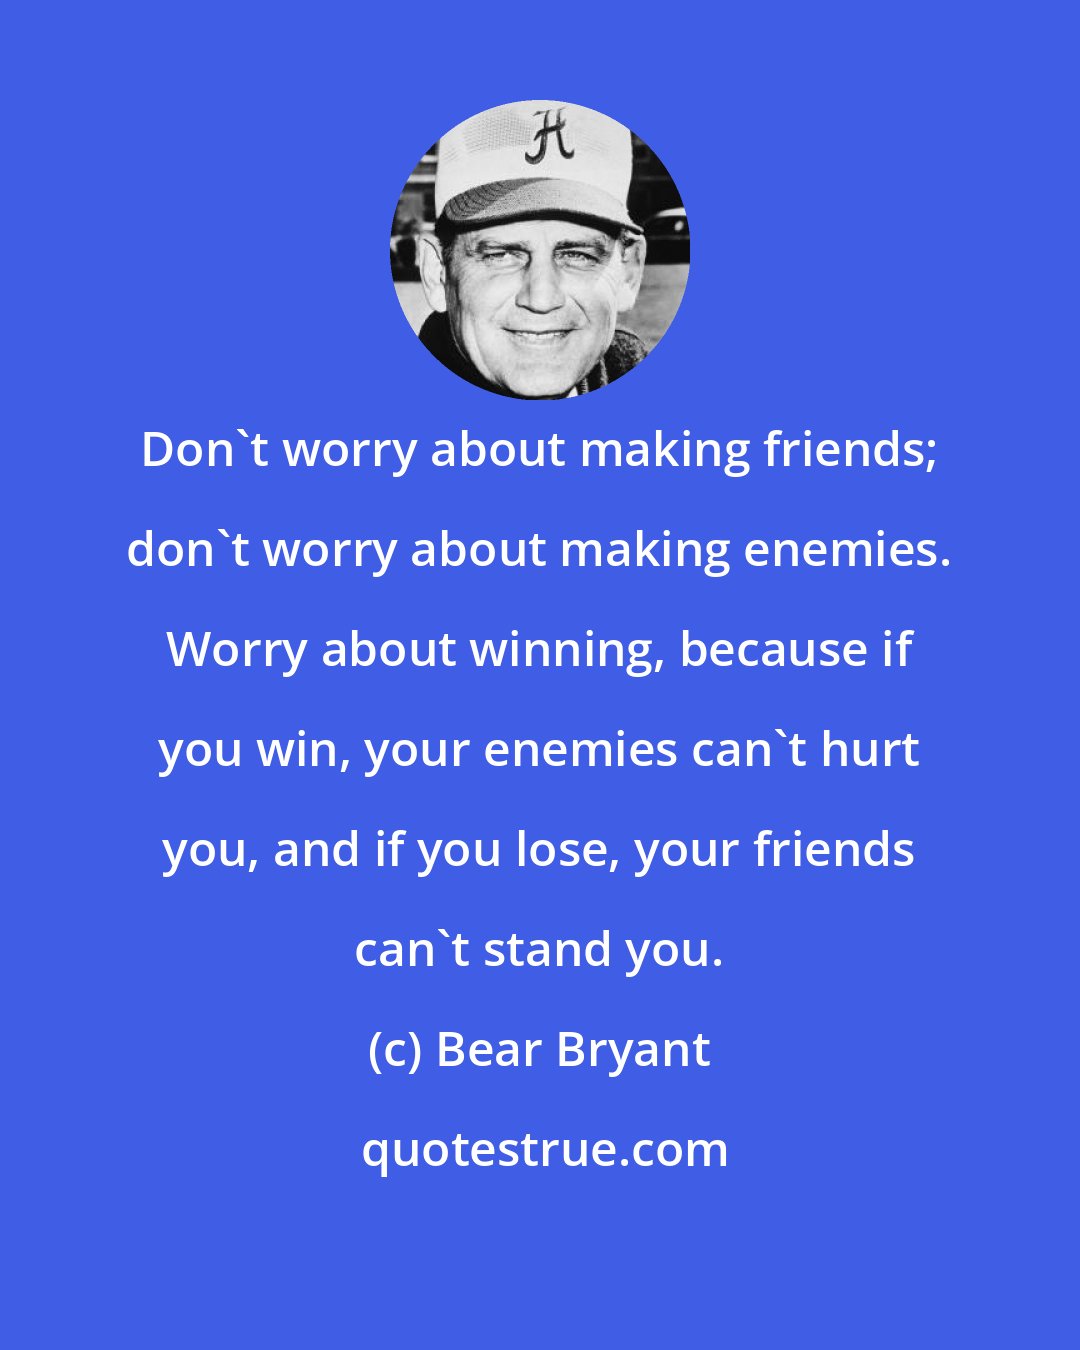 Bear Bryant: Don't worry about making friends; don't worry about making enemies. Worry about winning, because if you win, your enemies can't hurt you, and if you lose, your friends can't stand you.